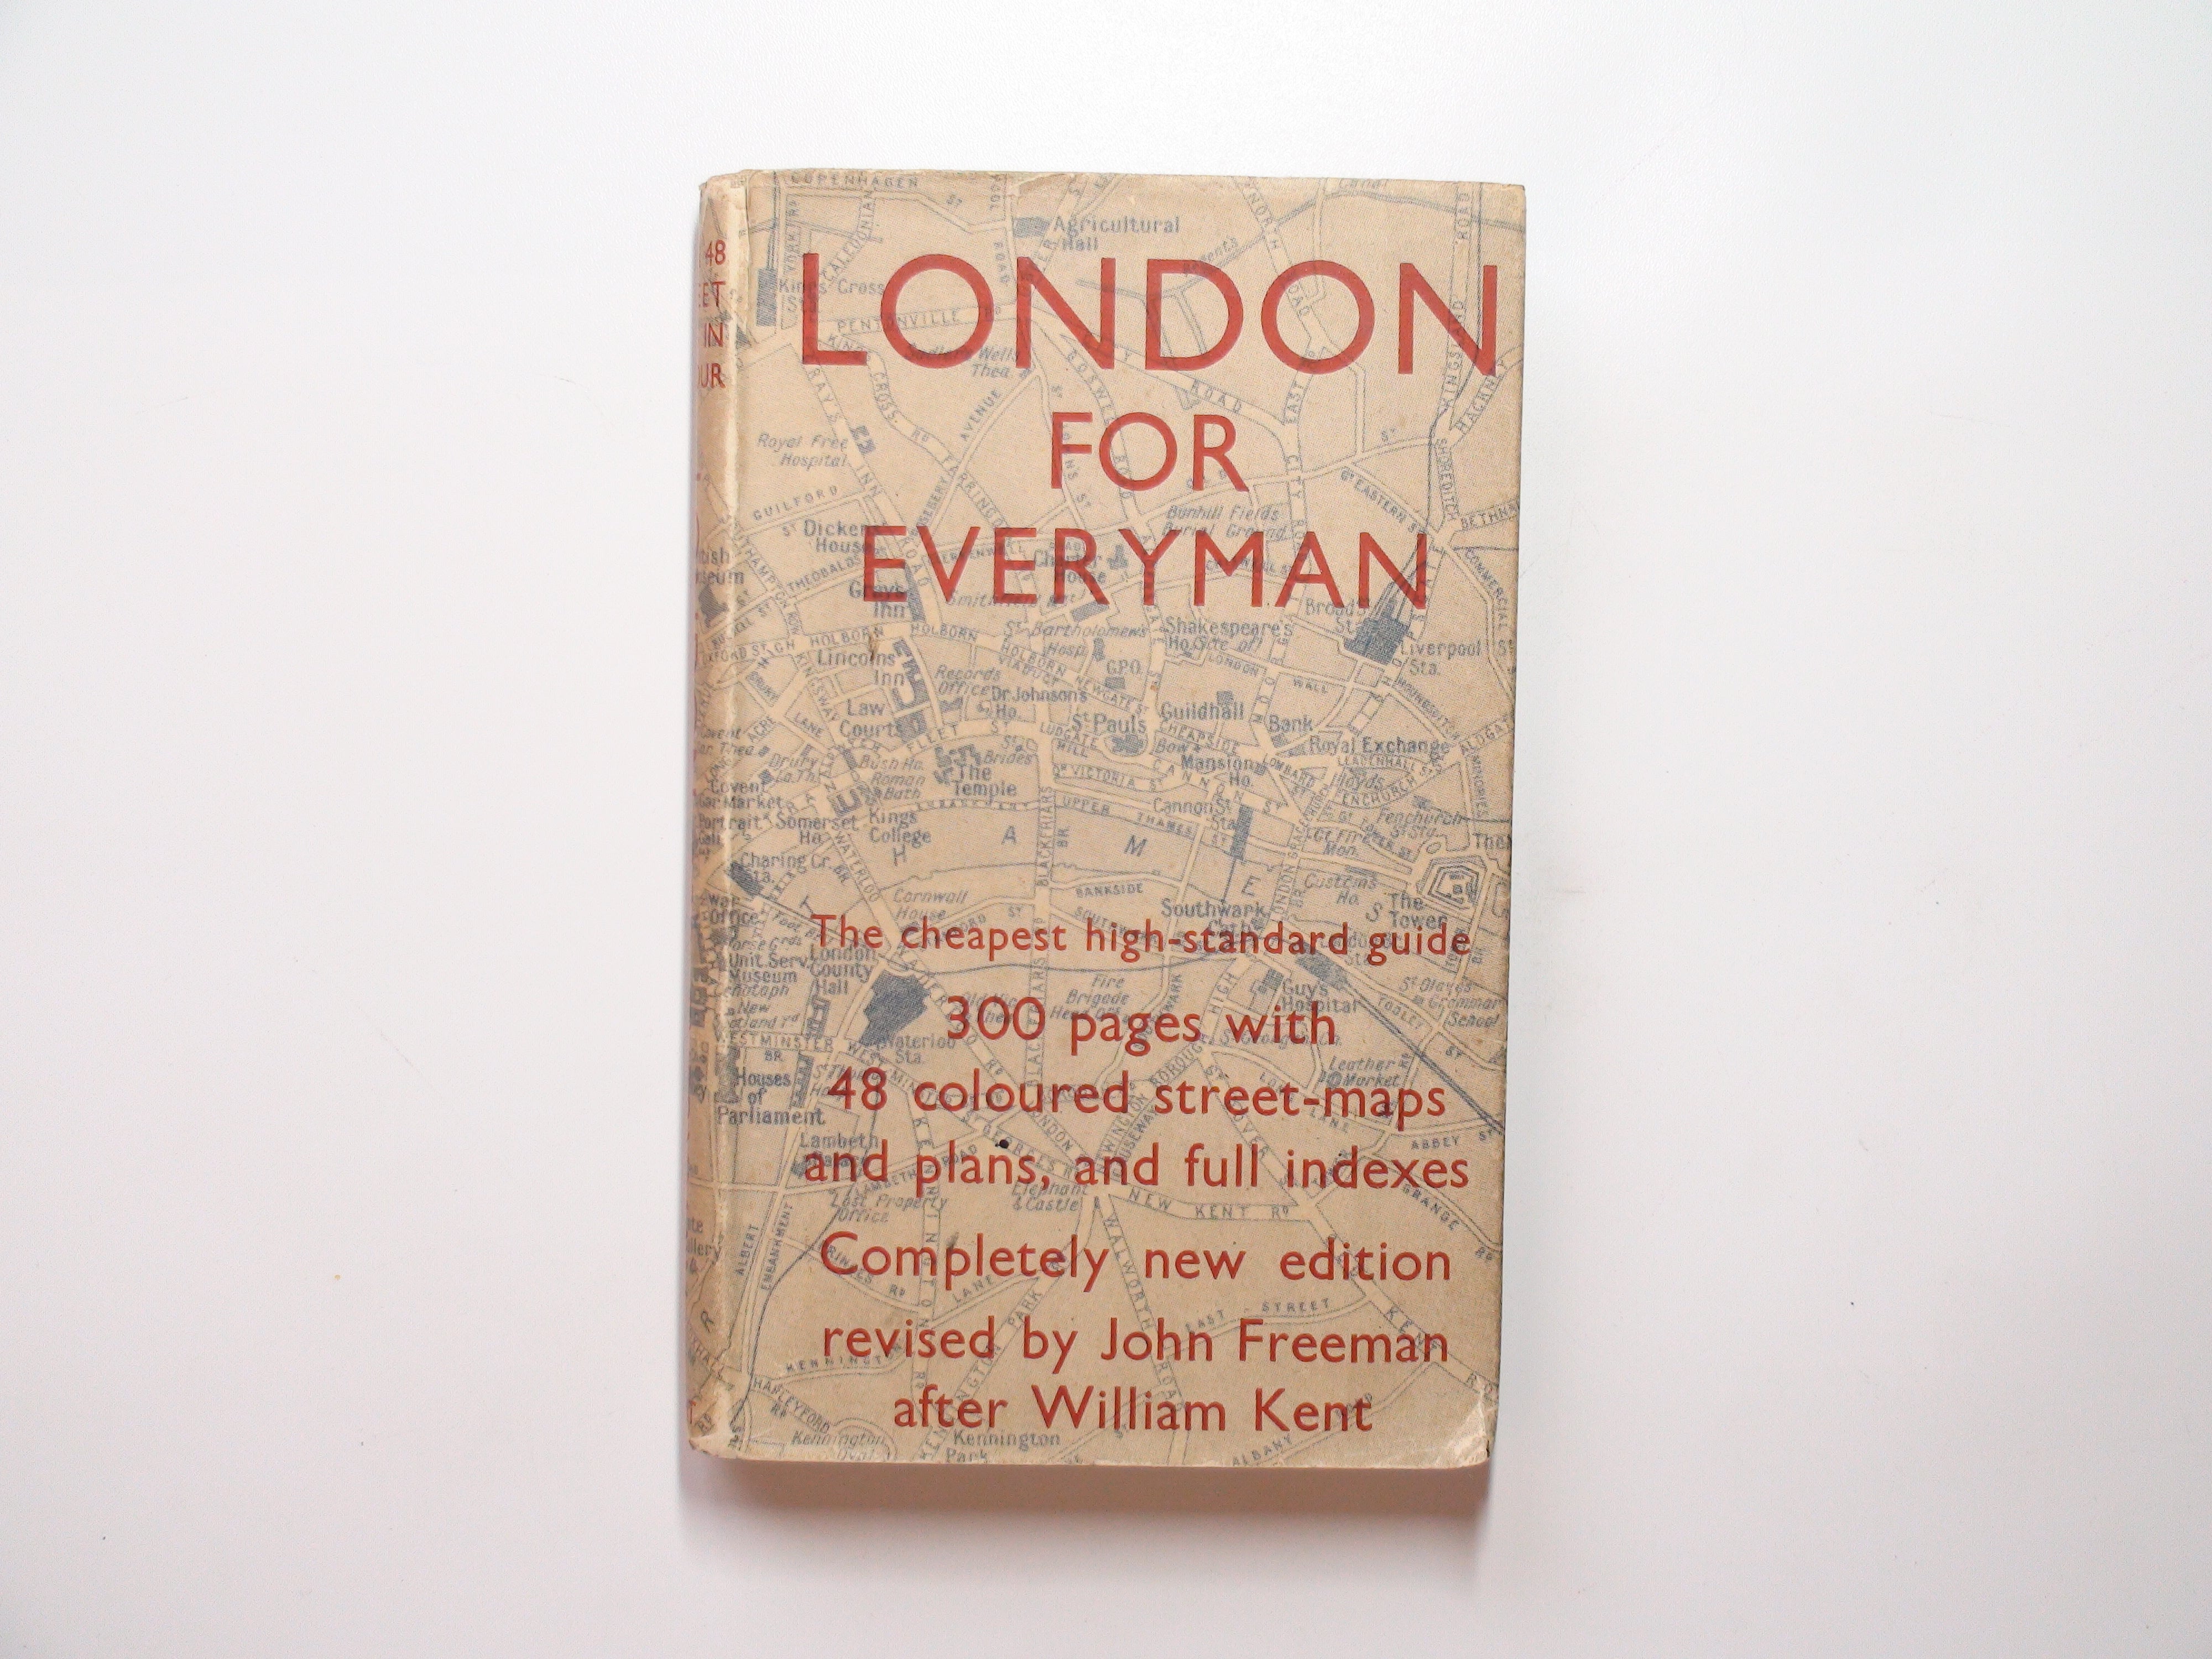 London for Everyman, by William Kent, With Colored Maps, 1956